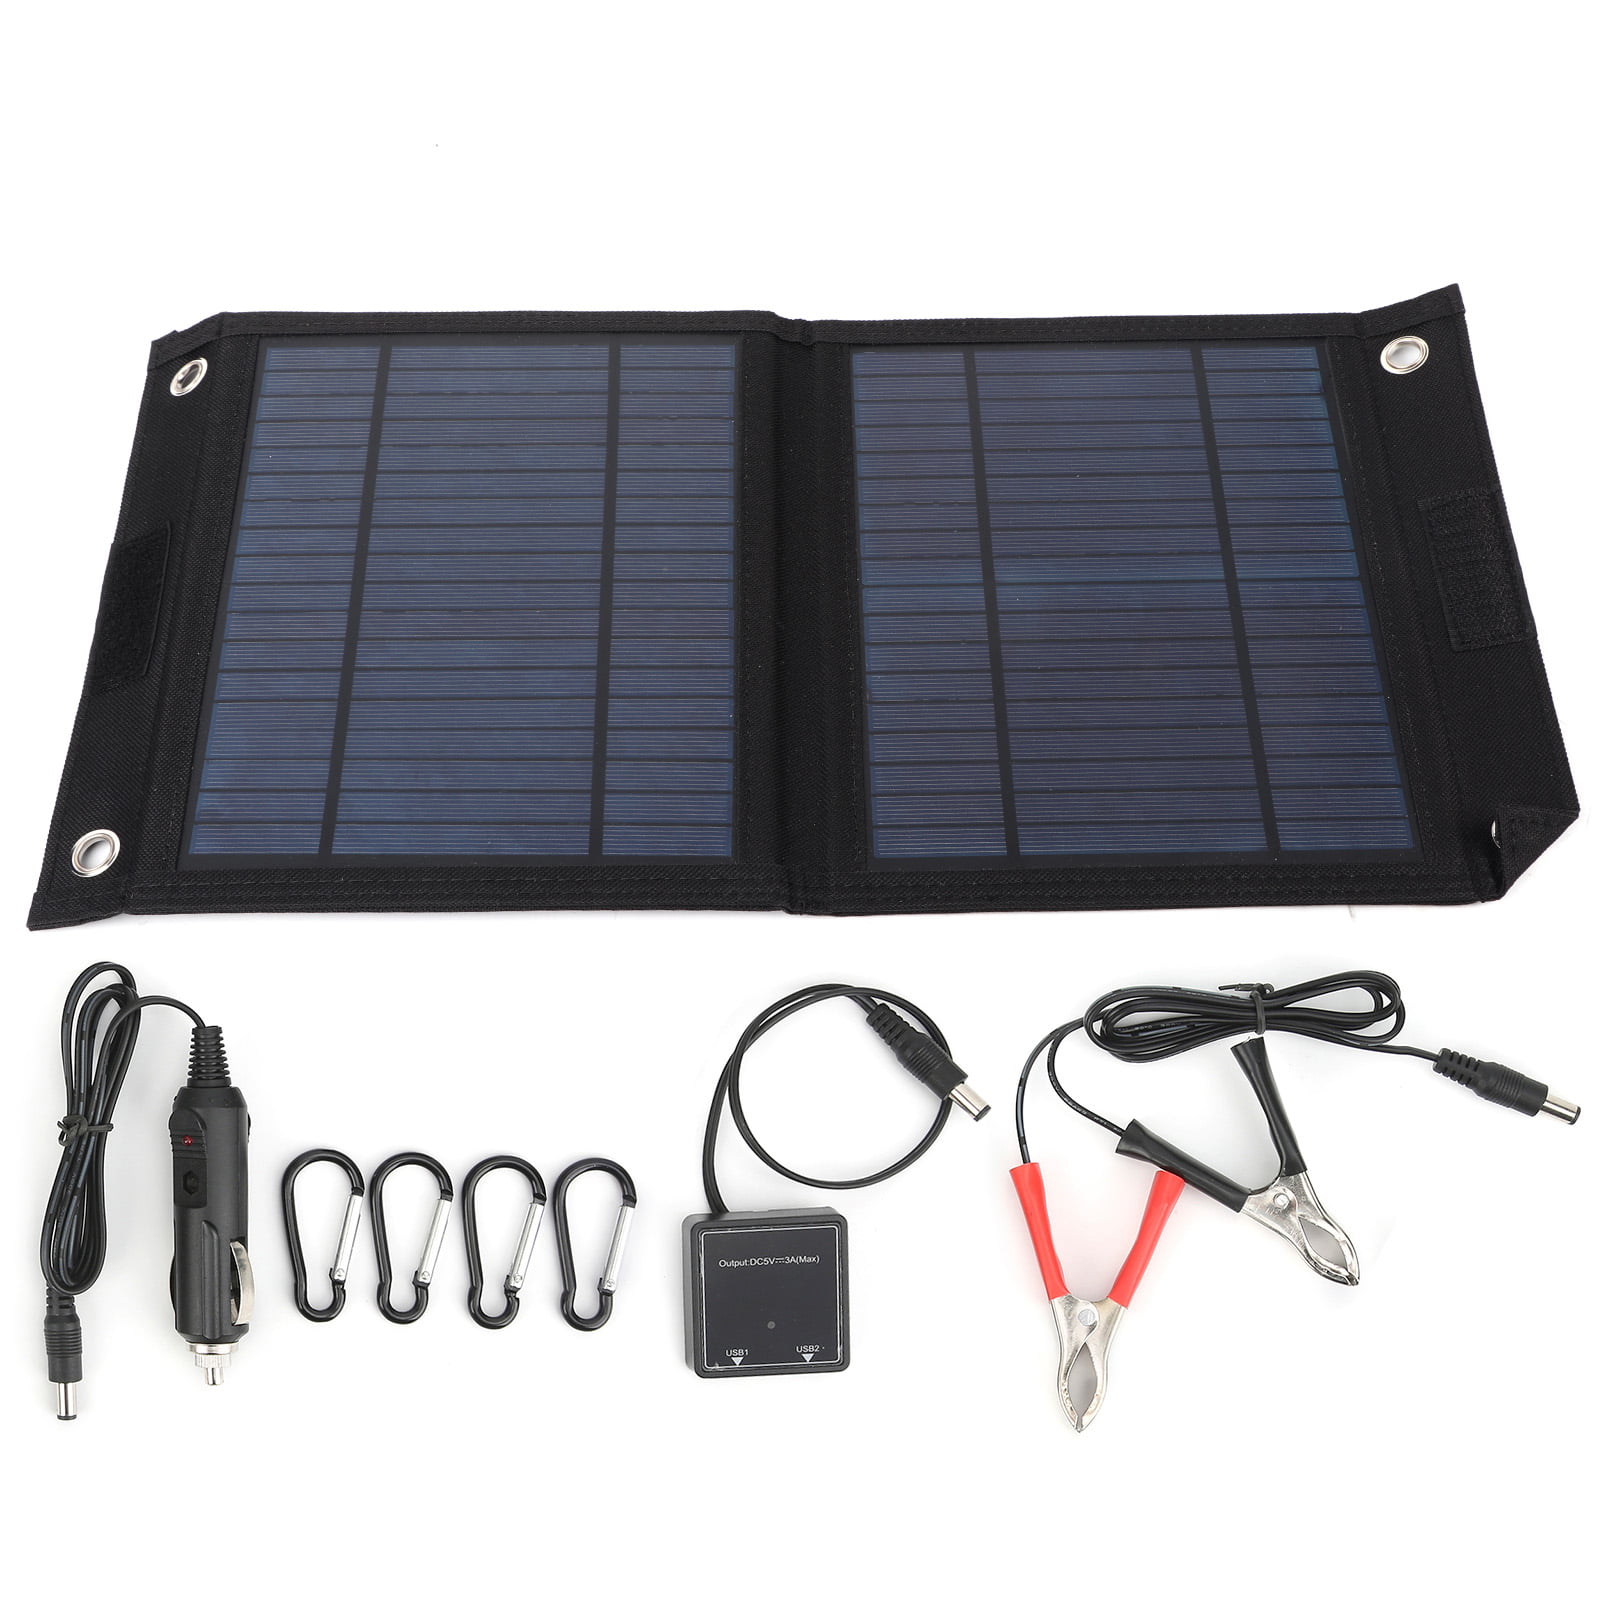 35W Folding Solar Panel DC5V USB Portable Power Charger Camping Travel Battery 